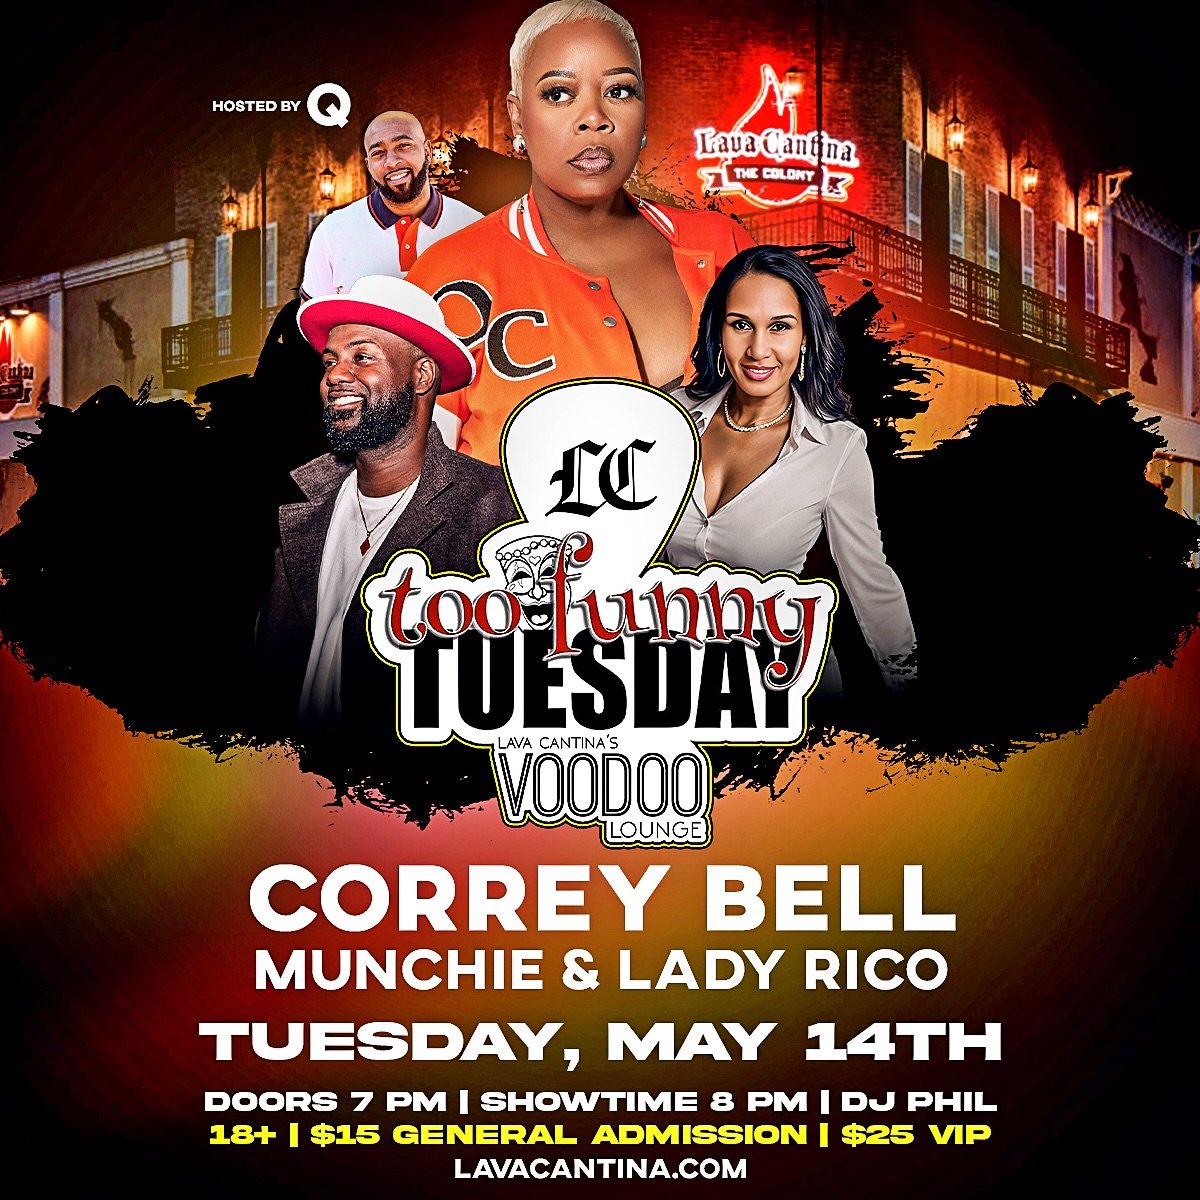 🚨 Get ready for Too Funny Tuesday @lavacantinatc - Tuesday, May 14th starting at 8pm! 🚨

🔥 This hilarious episode will feature Correy Bell - with Munchie &amp; Lady Rico! Hosted by Q. 🔥

🎟️🎟️➡️ LavaCantina.com
AGES: 18+

#tootunnytuesday #qgotj